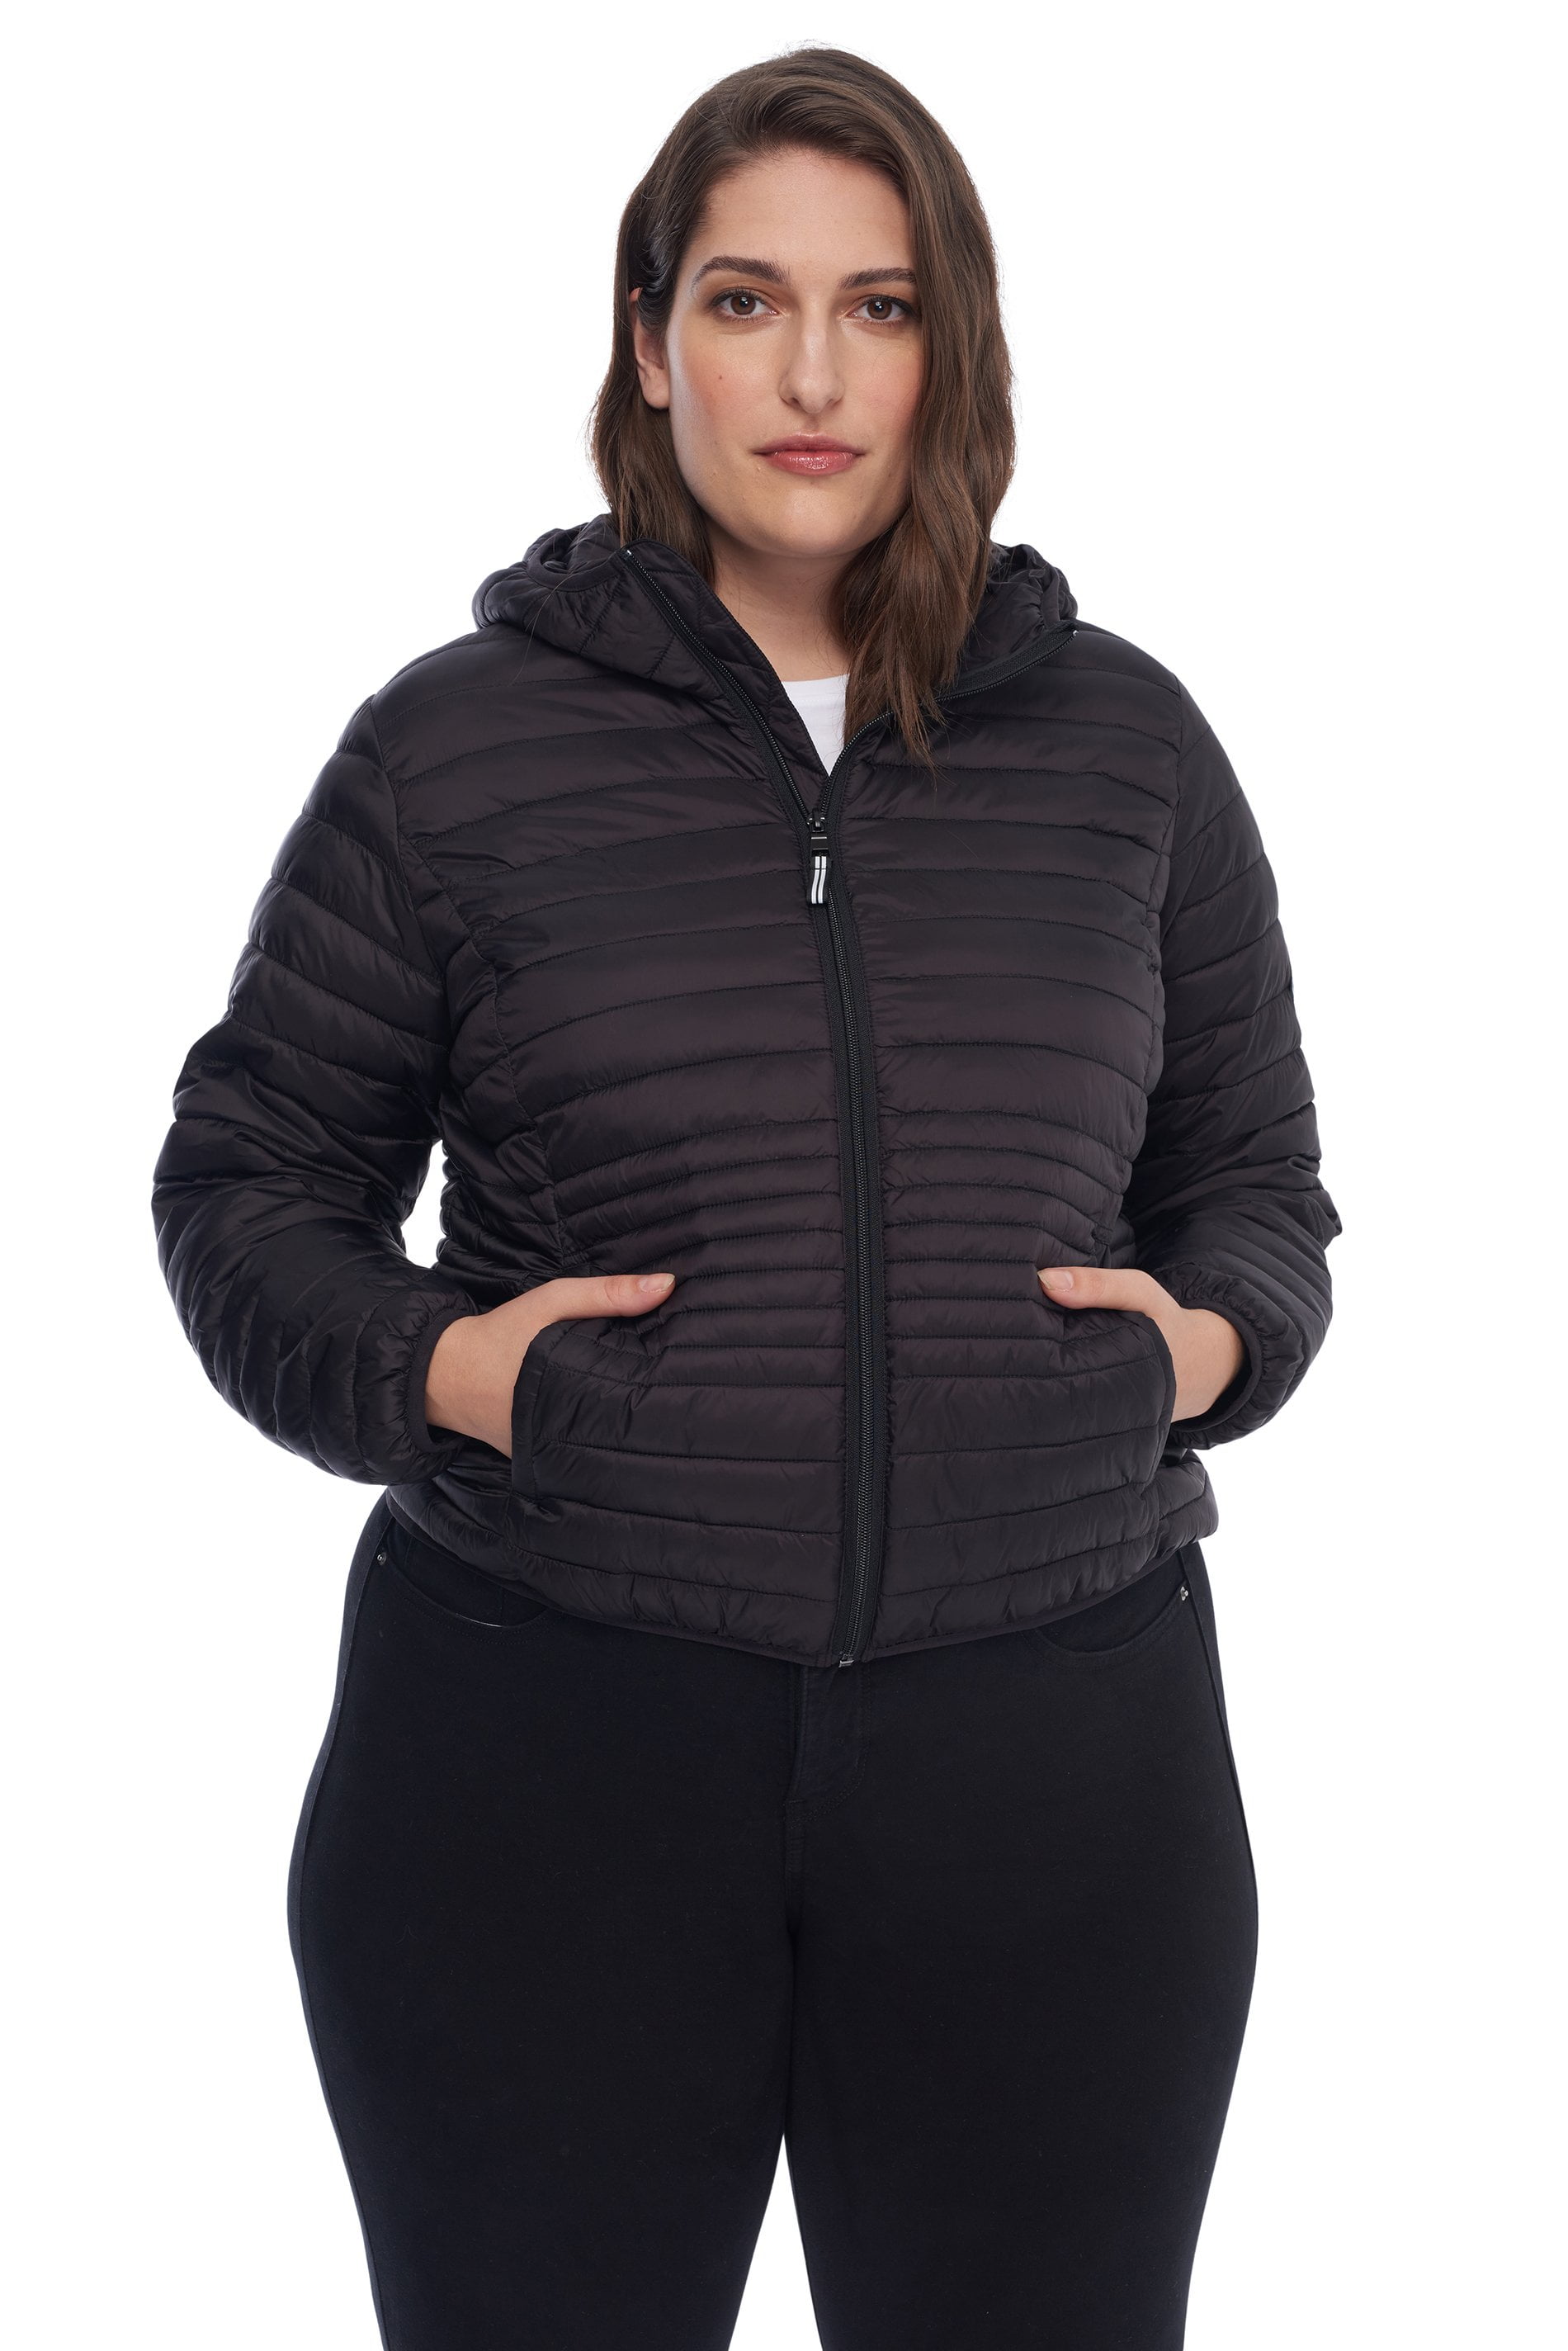 THE PLUS PROJECT Mens Plus Size Lightweight Down Jacket with Stand Collar 